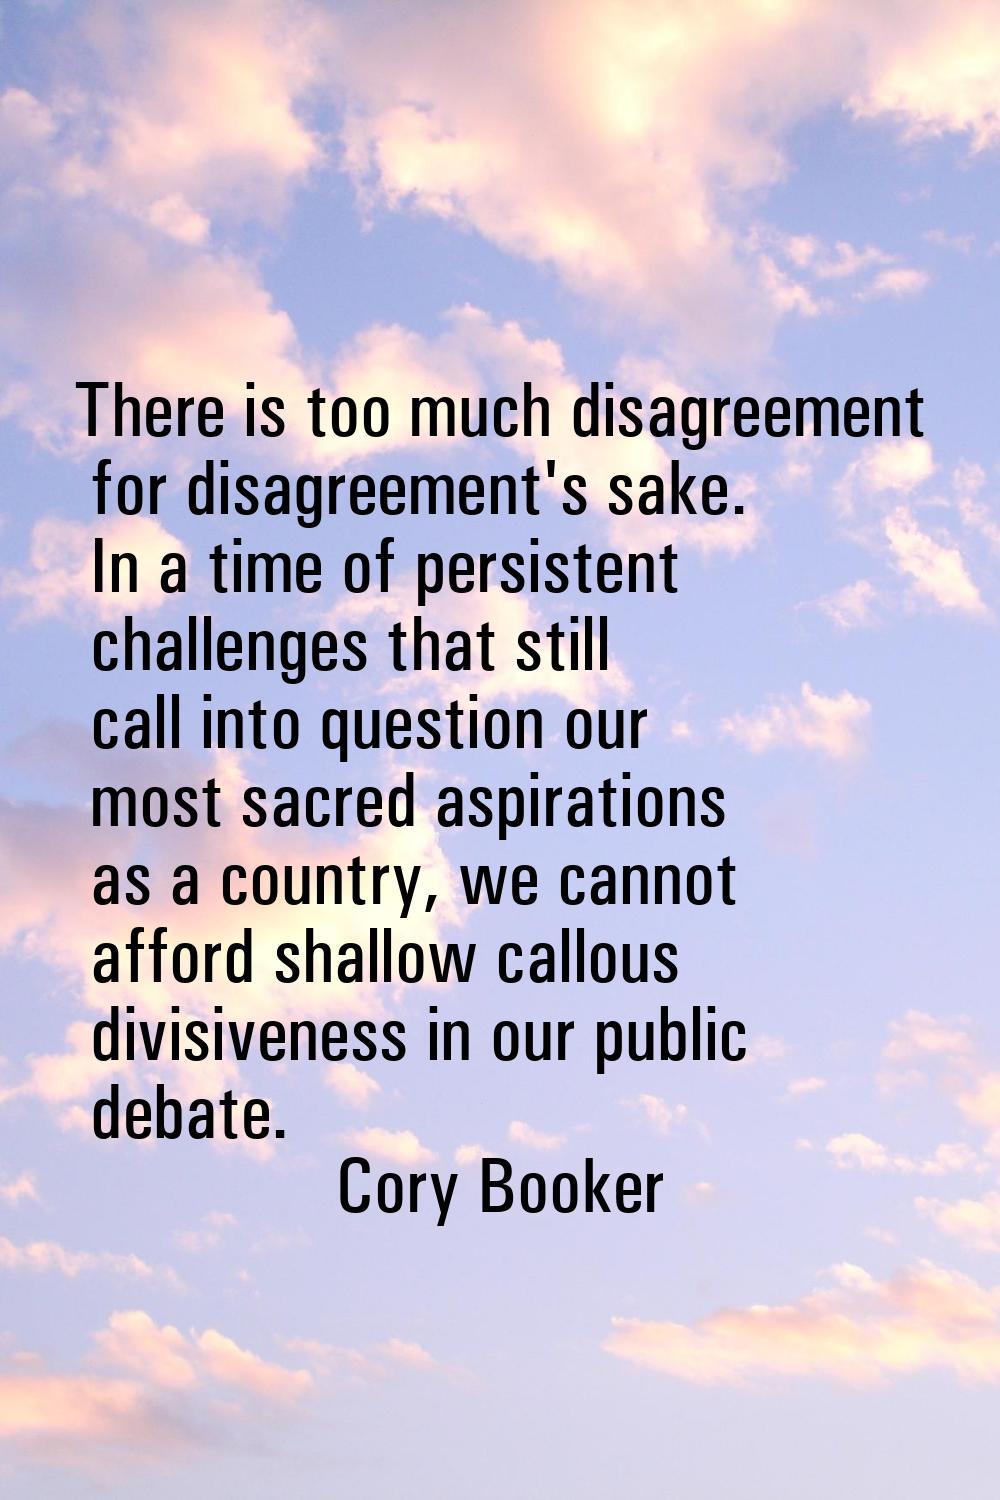 There is too much disagreement for disagreement's sake. In a time of persistent challenges that sti